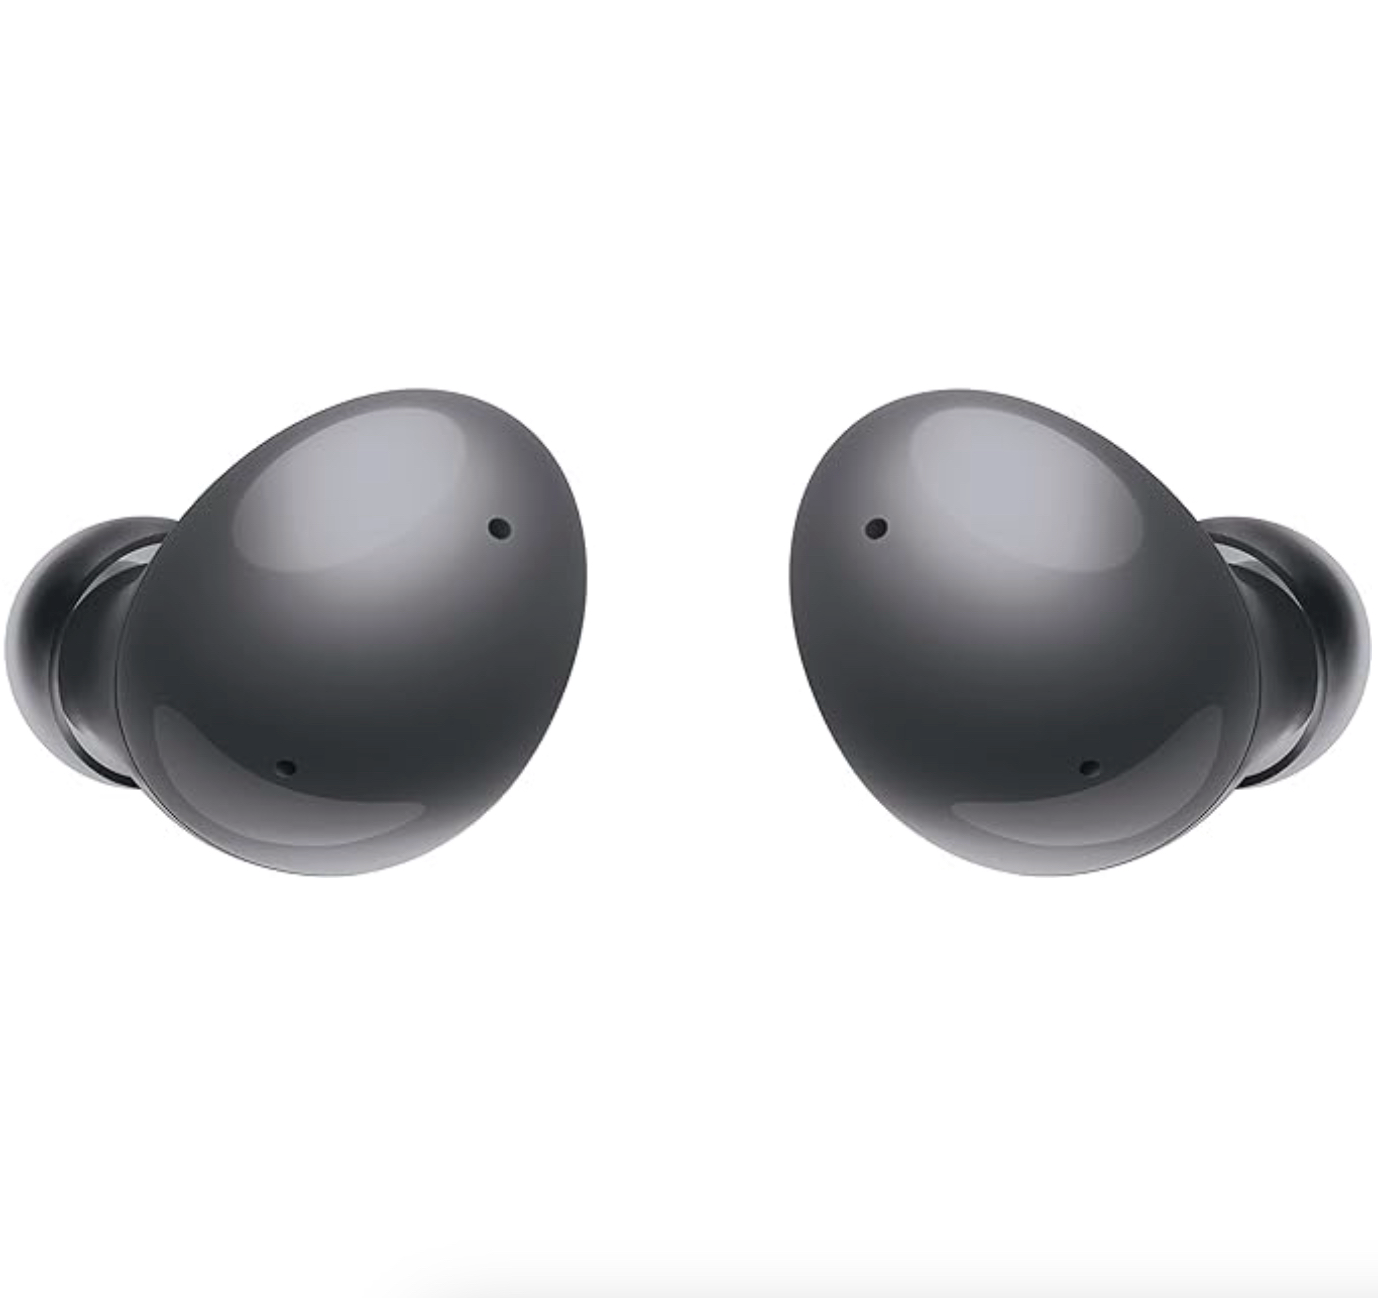 Samsung Galaxy Buds 2 Pro Review: great till they ain't